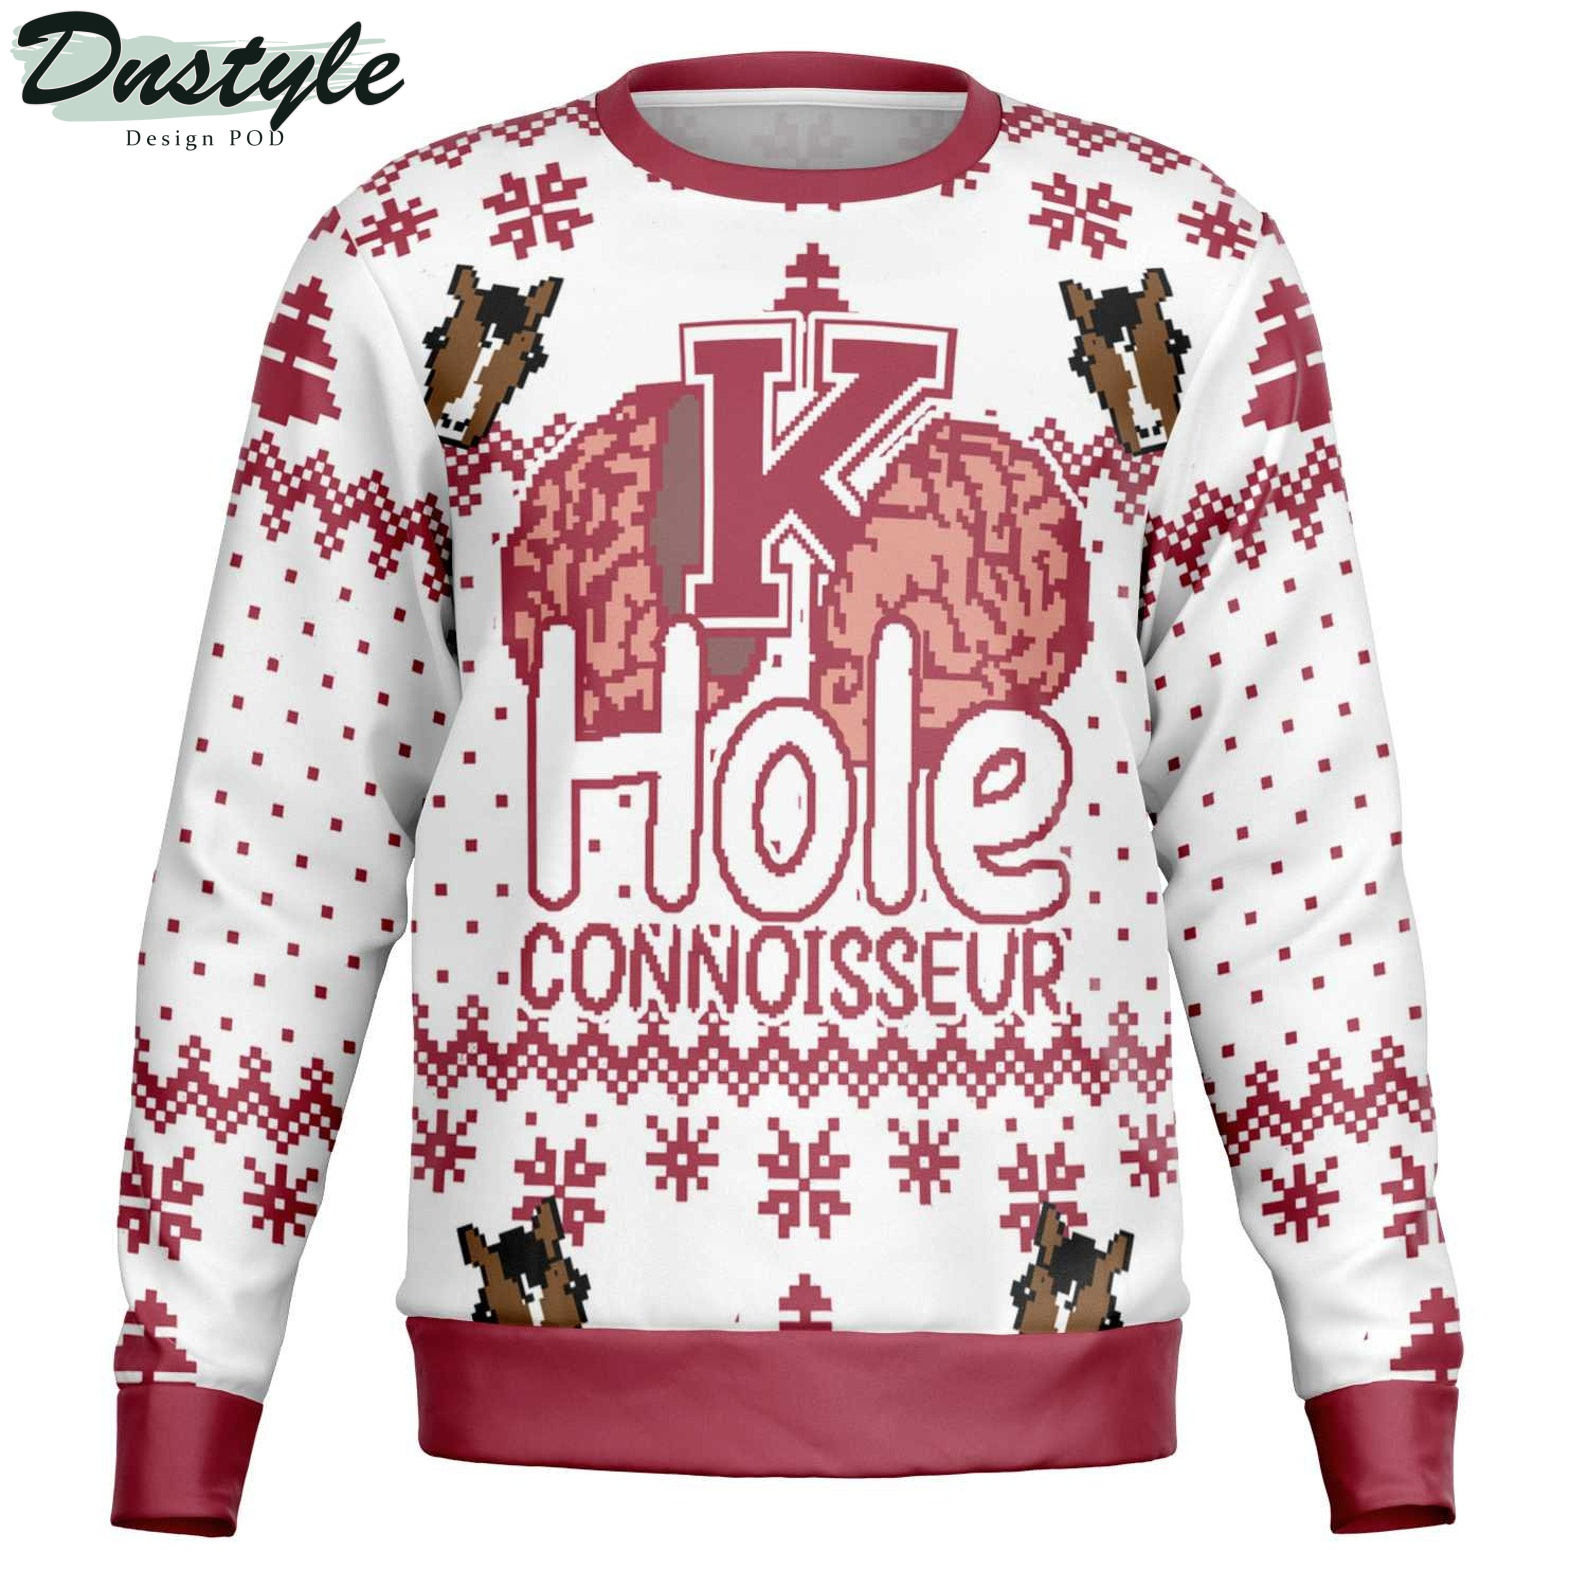 K Hole Connoisseur 2022 Ugly Christmas Sweater